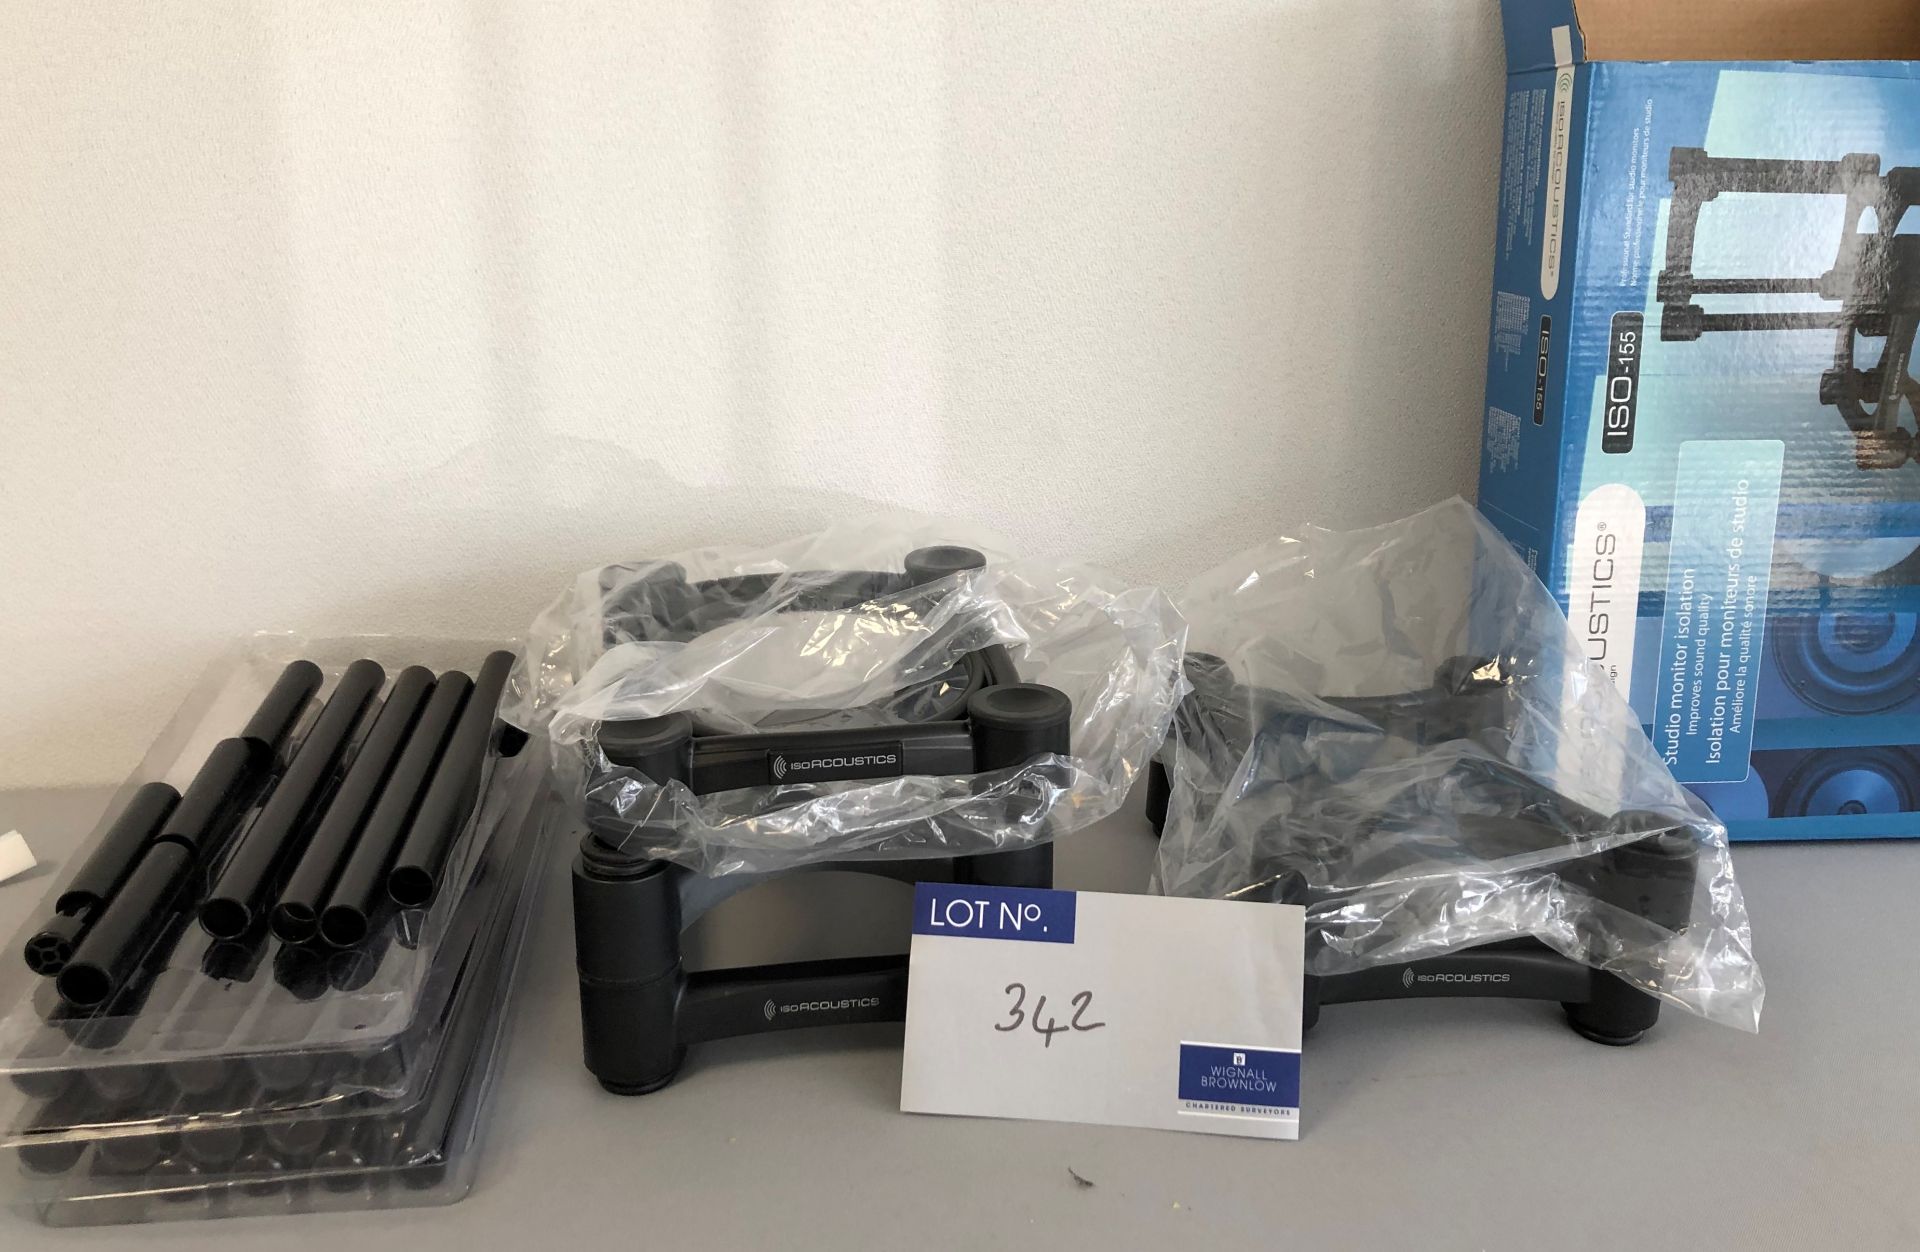 A Quantity of ISO Acoustics ISO L8R 155 Speaker Stand Components.